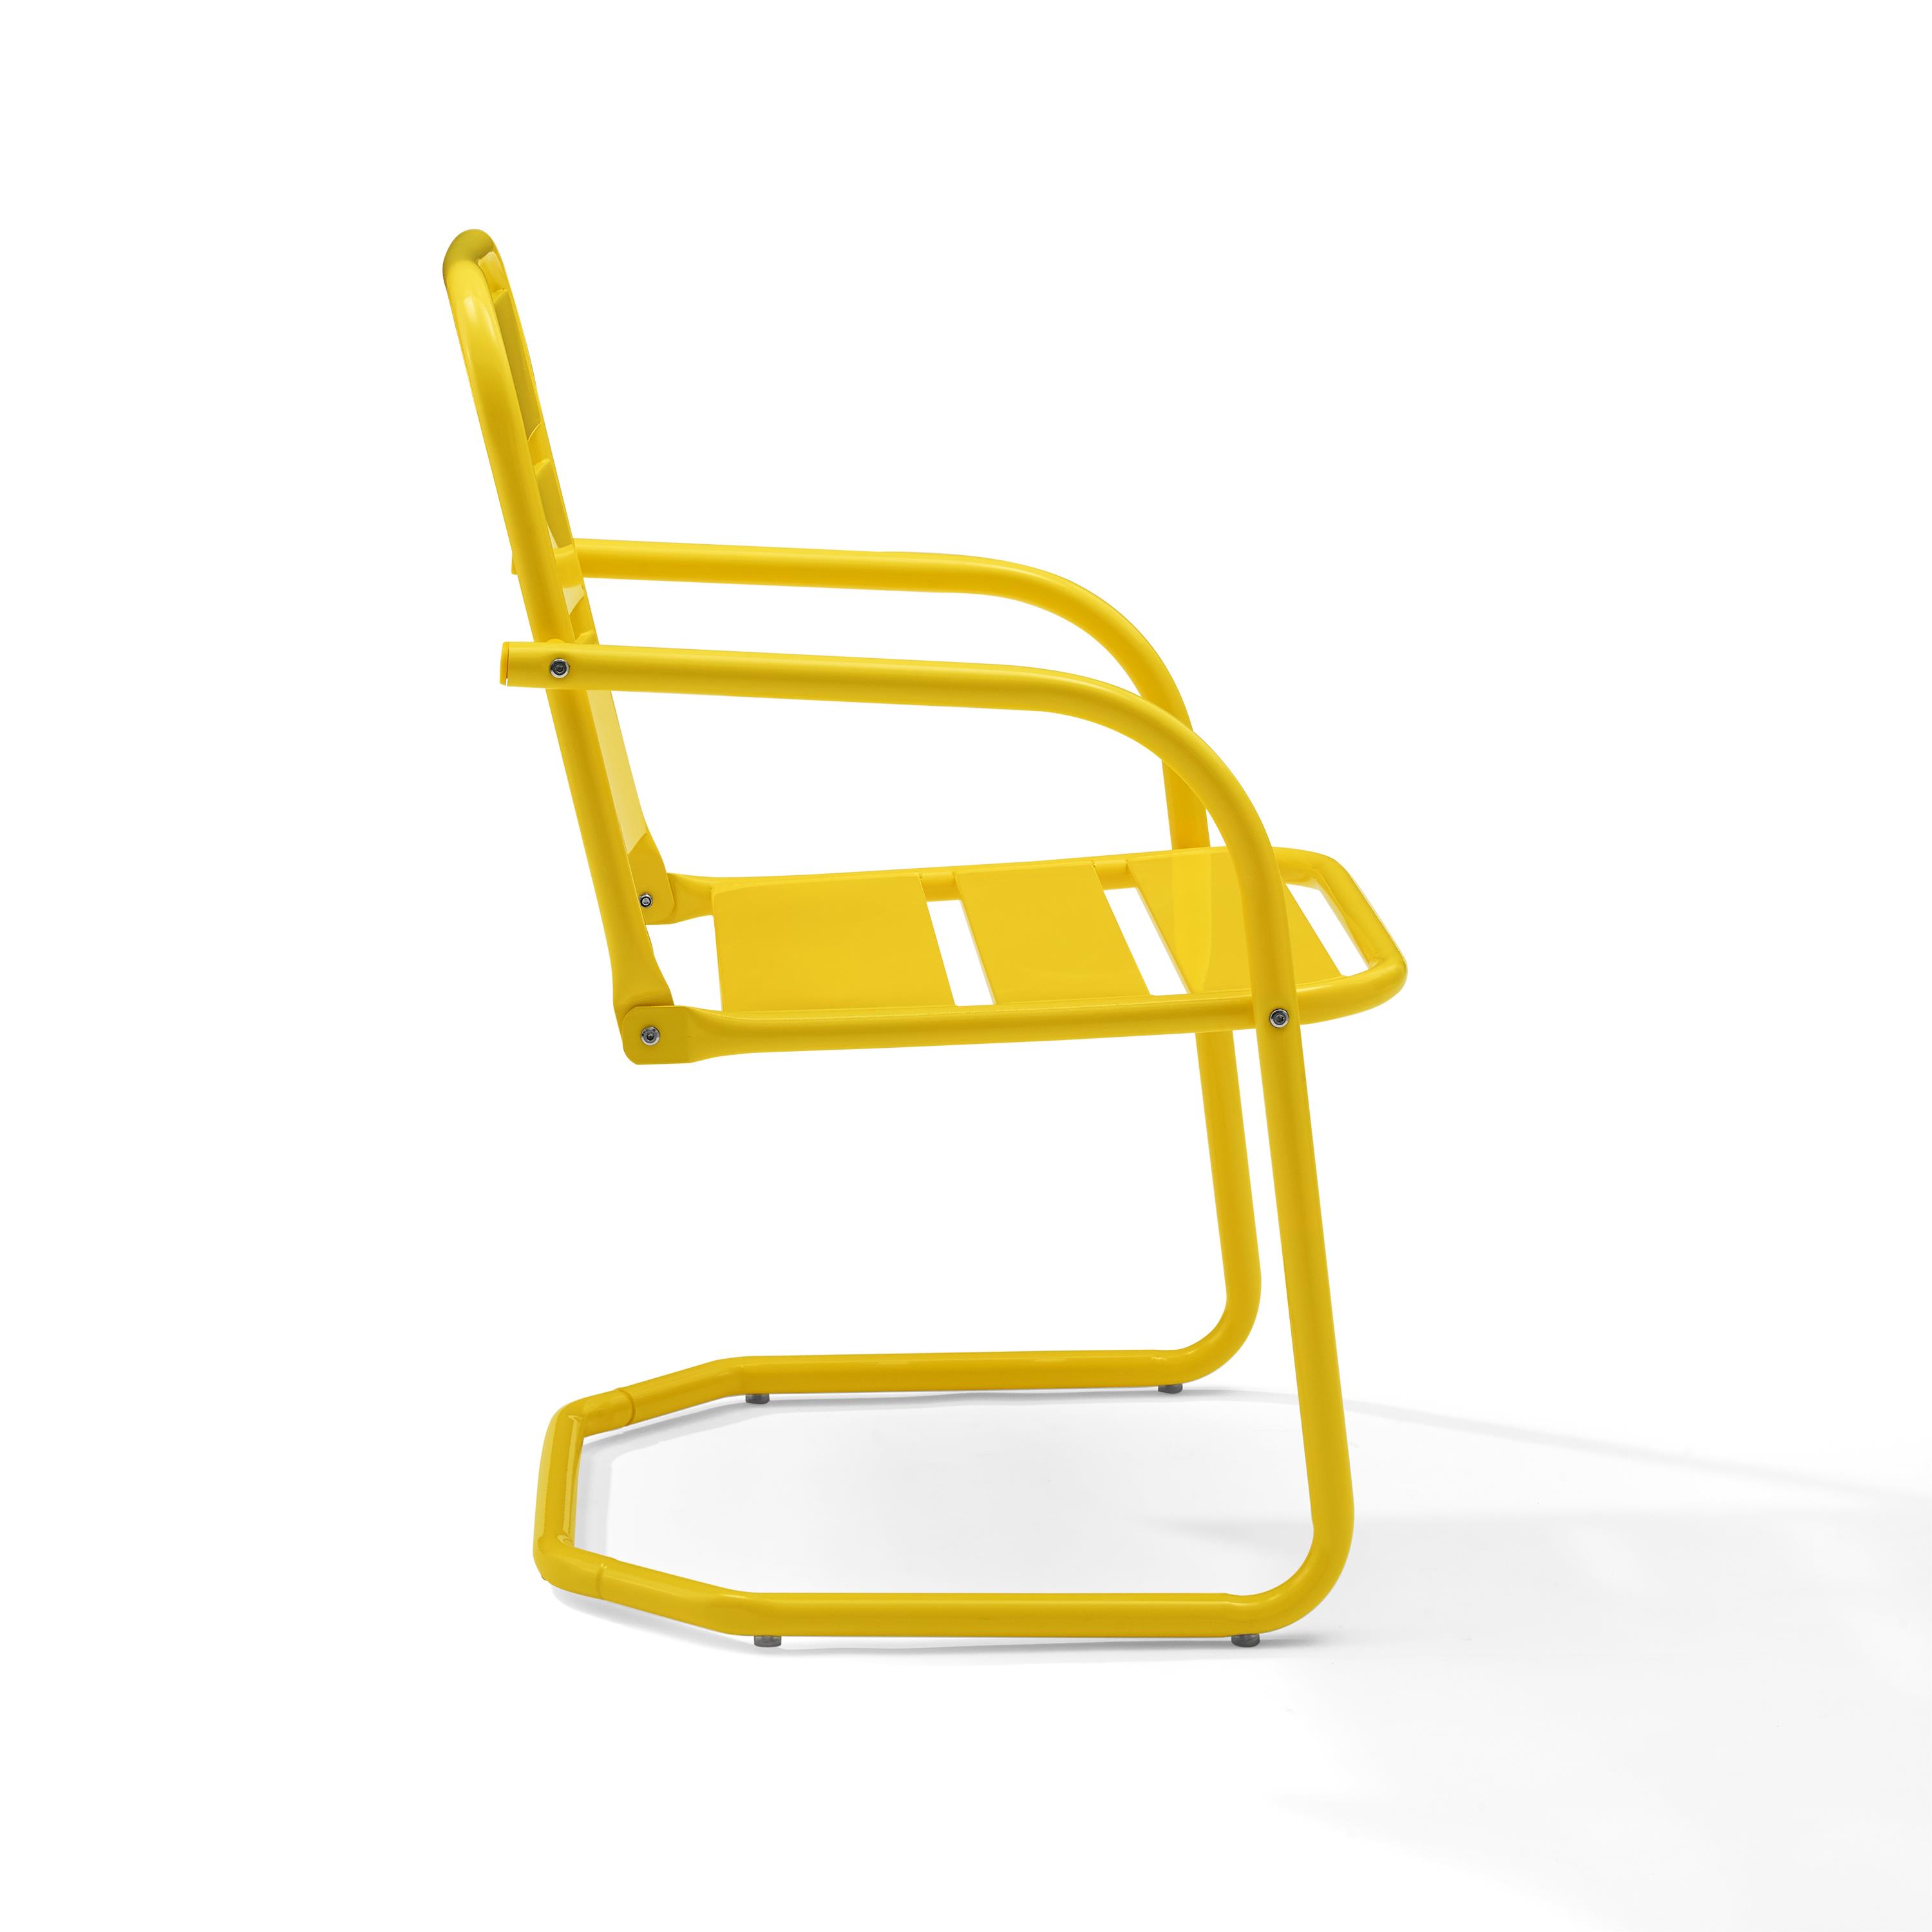 Crosley Brighton Metal Patio Chair in Yellow (Set of 2) - image 2 of 10